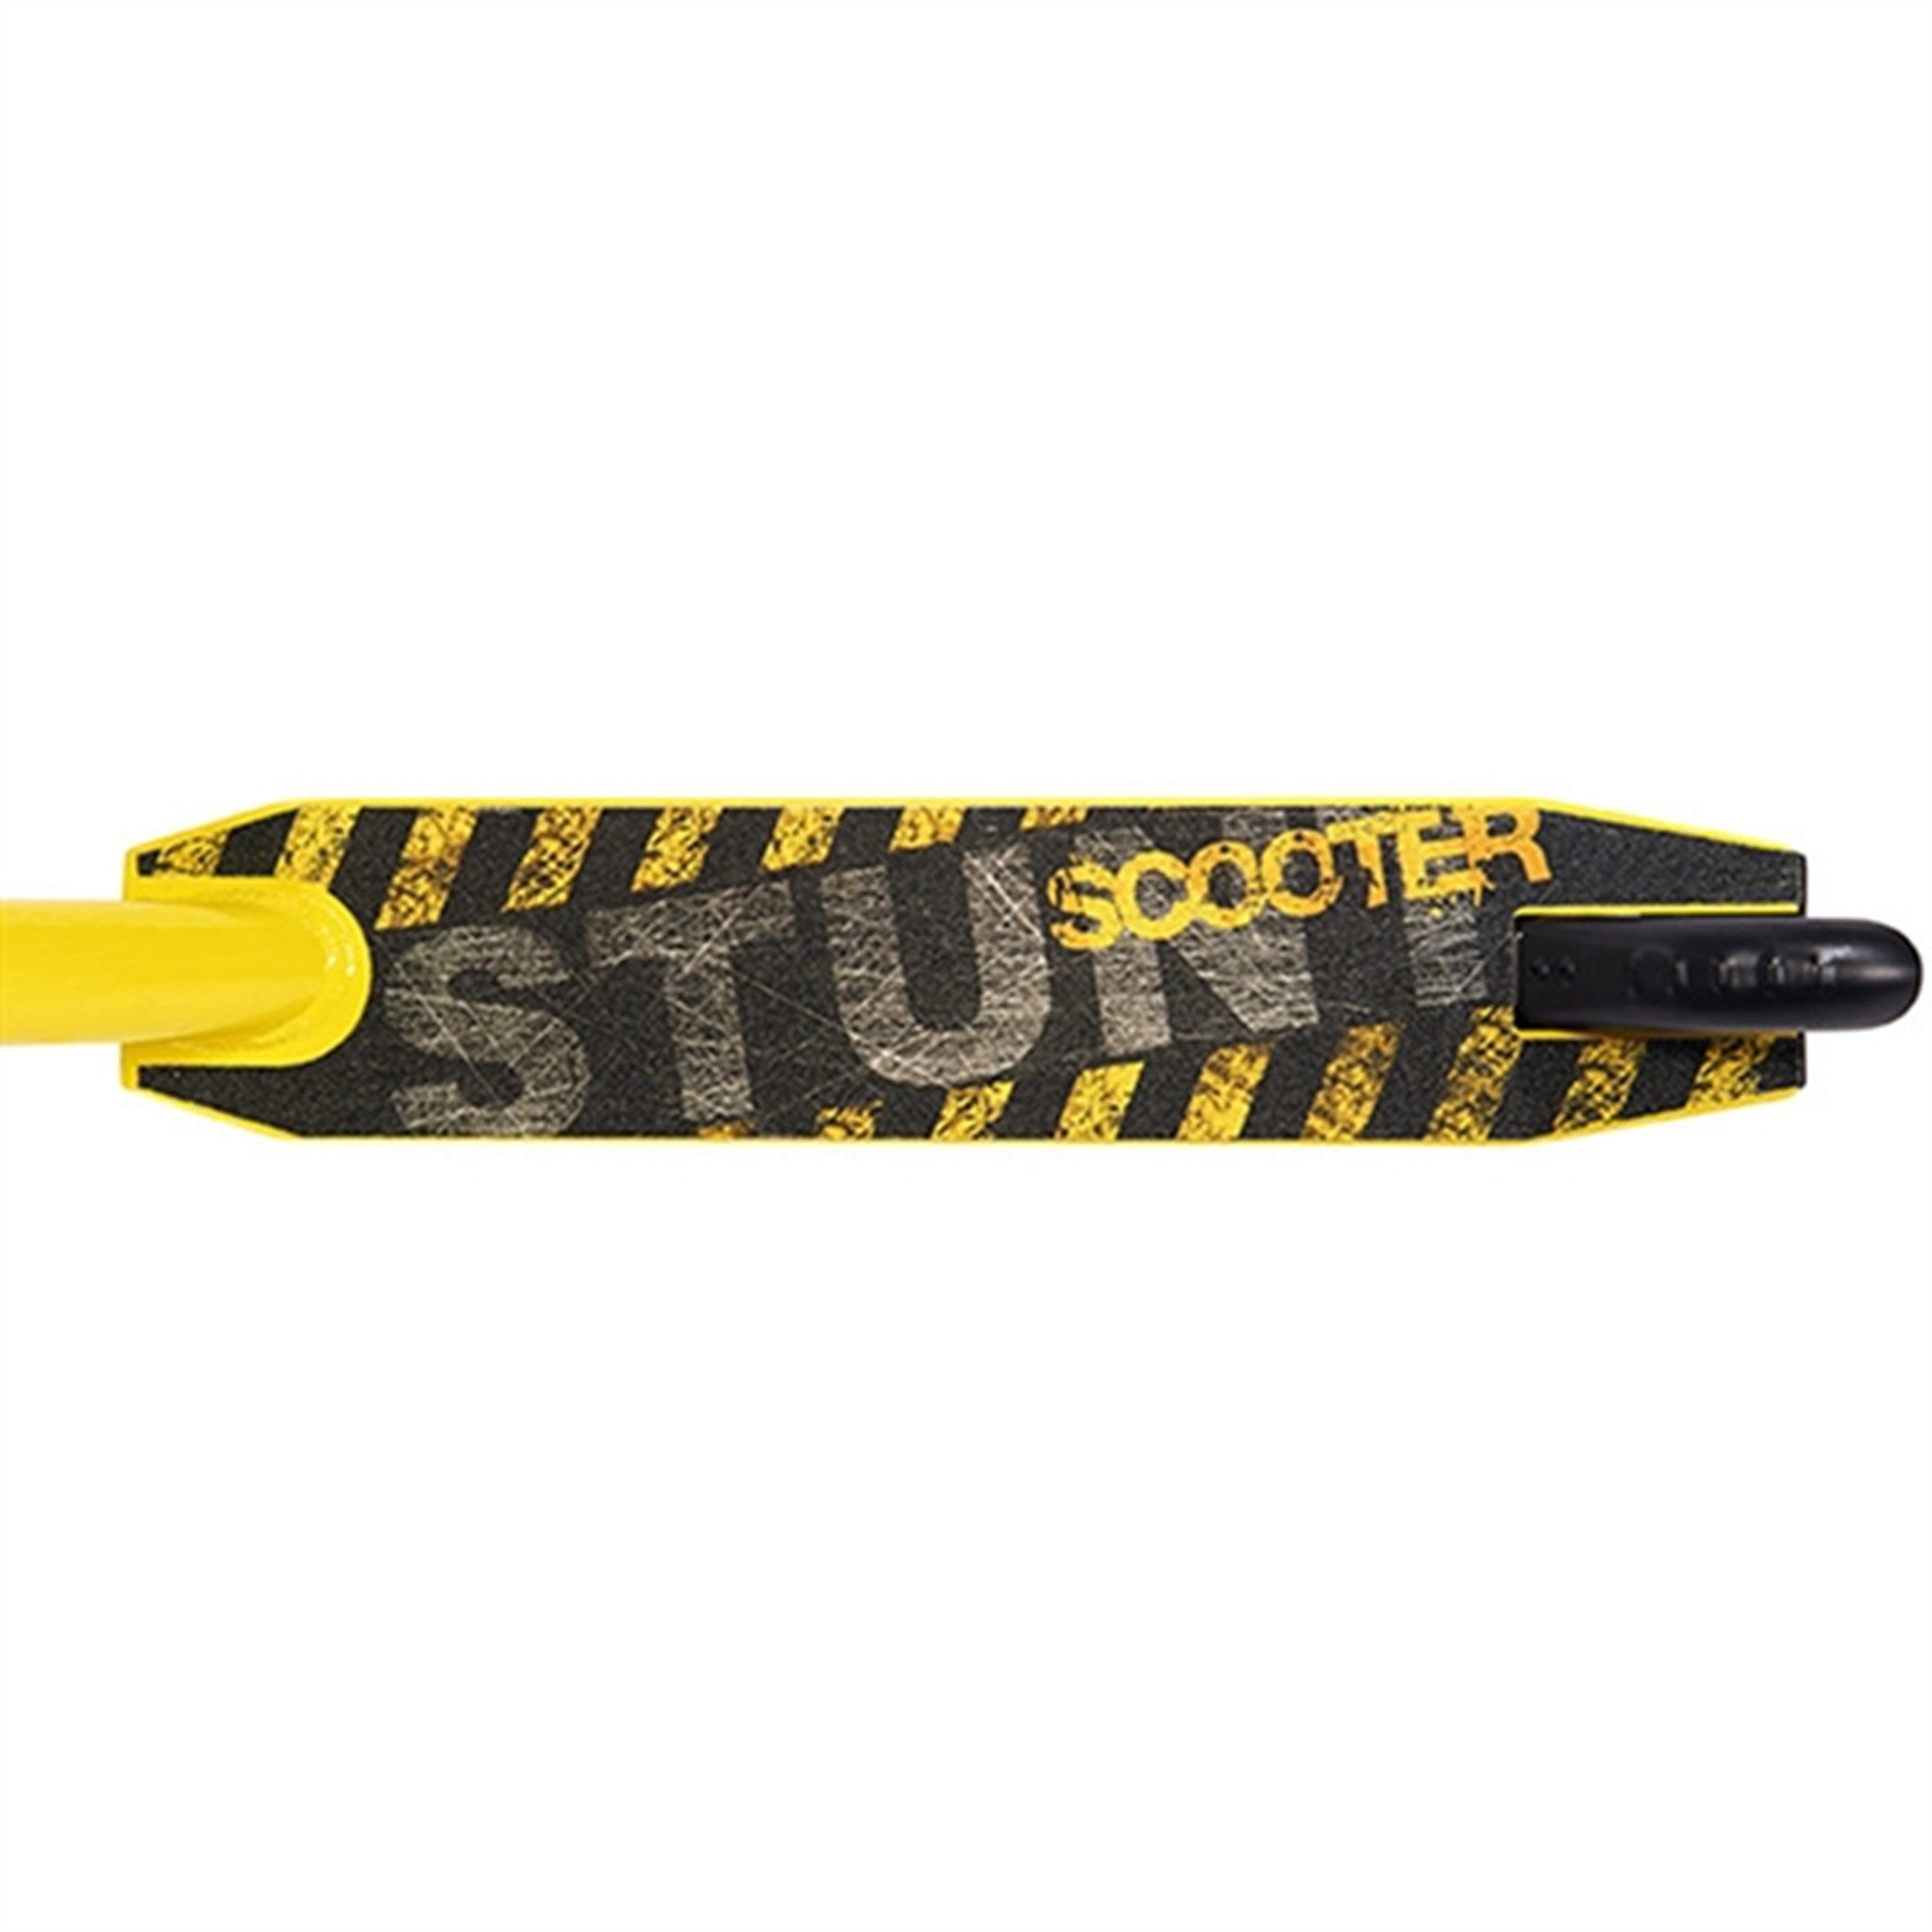 Skids Control Stunt Scooter Yellow 2